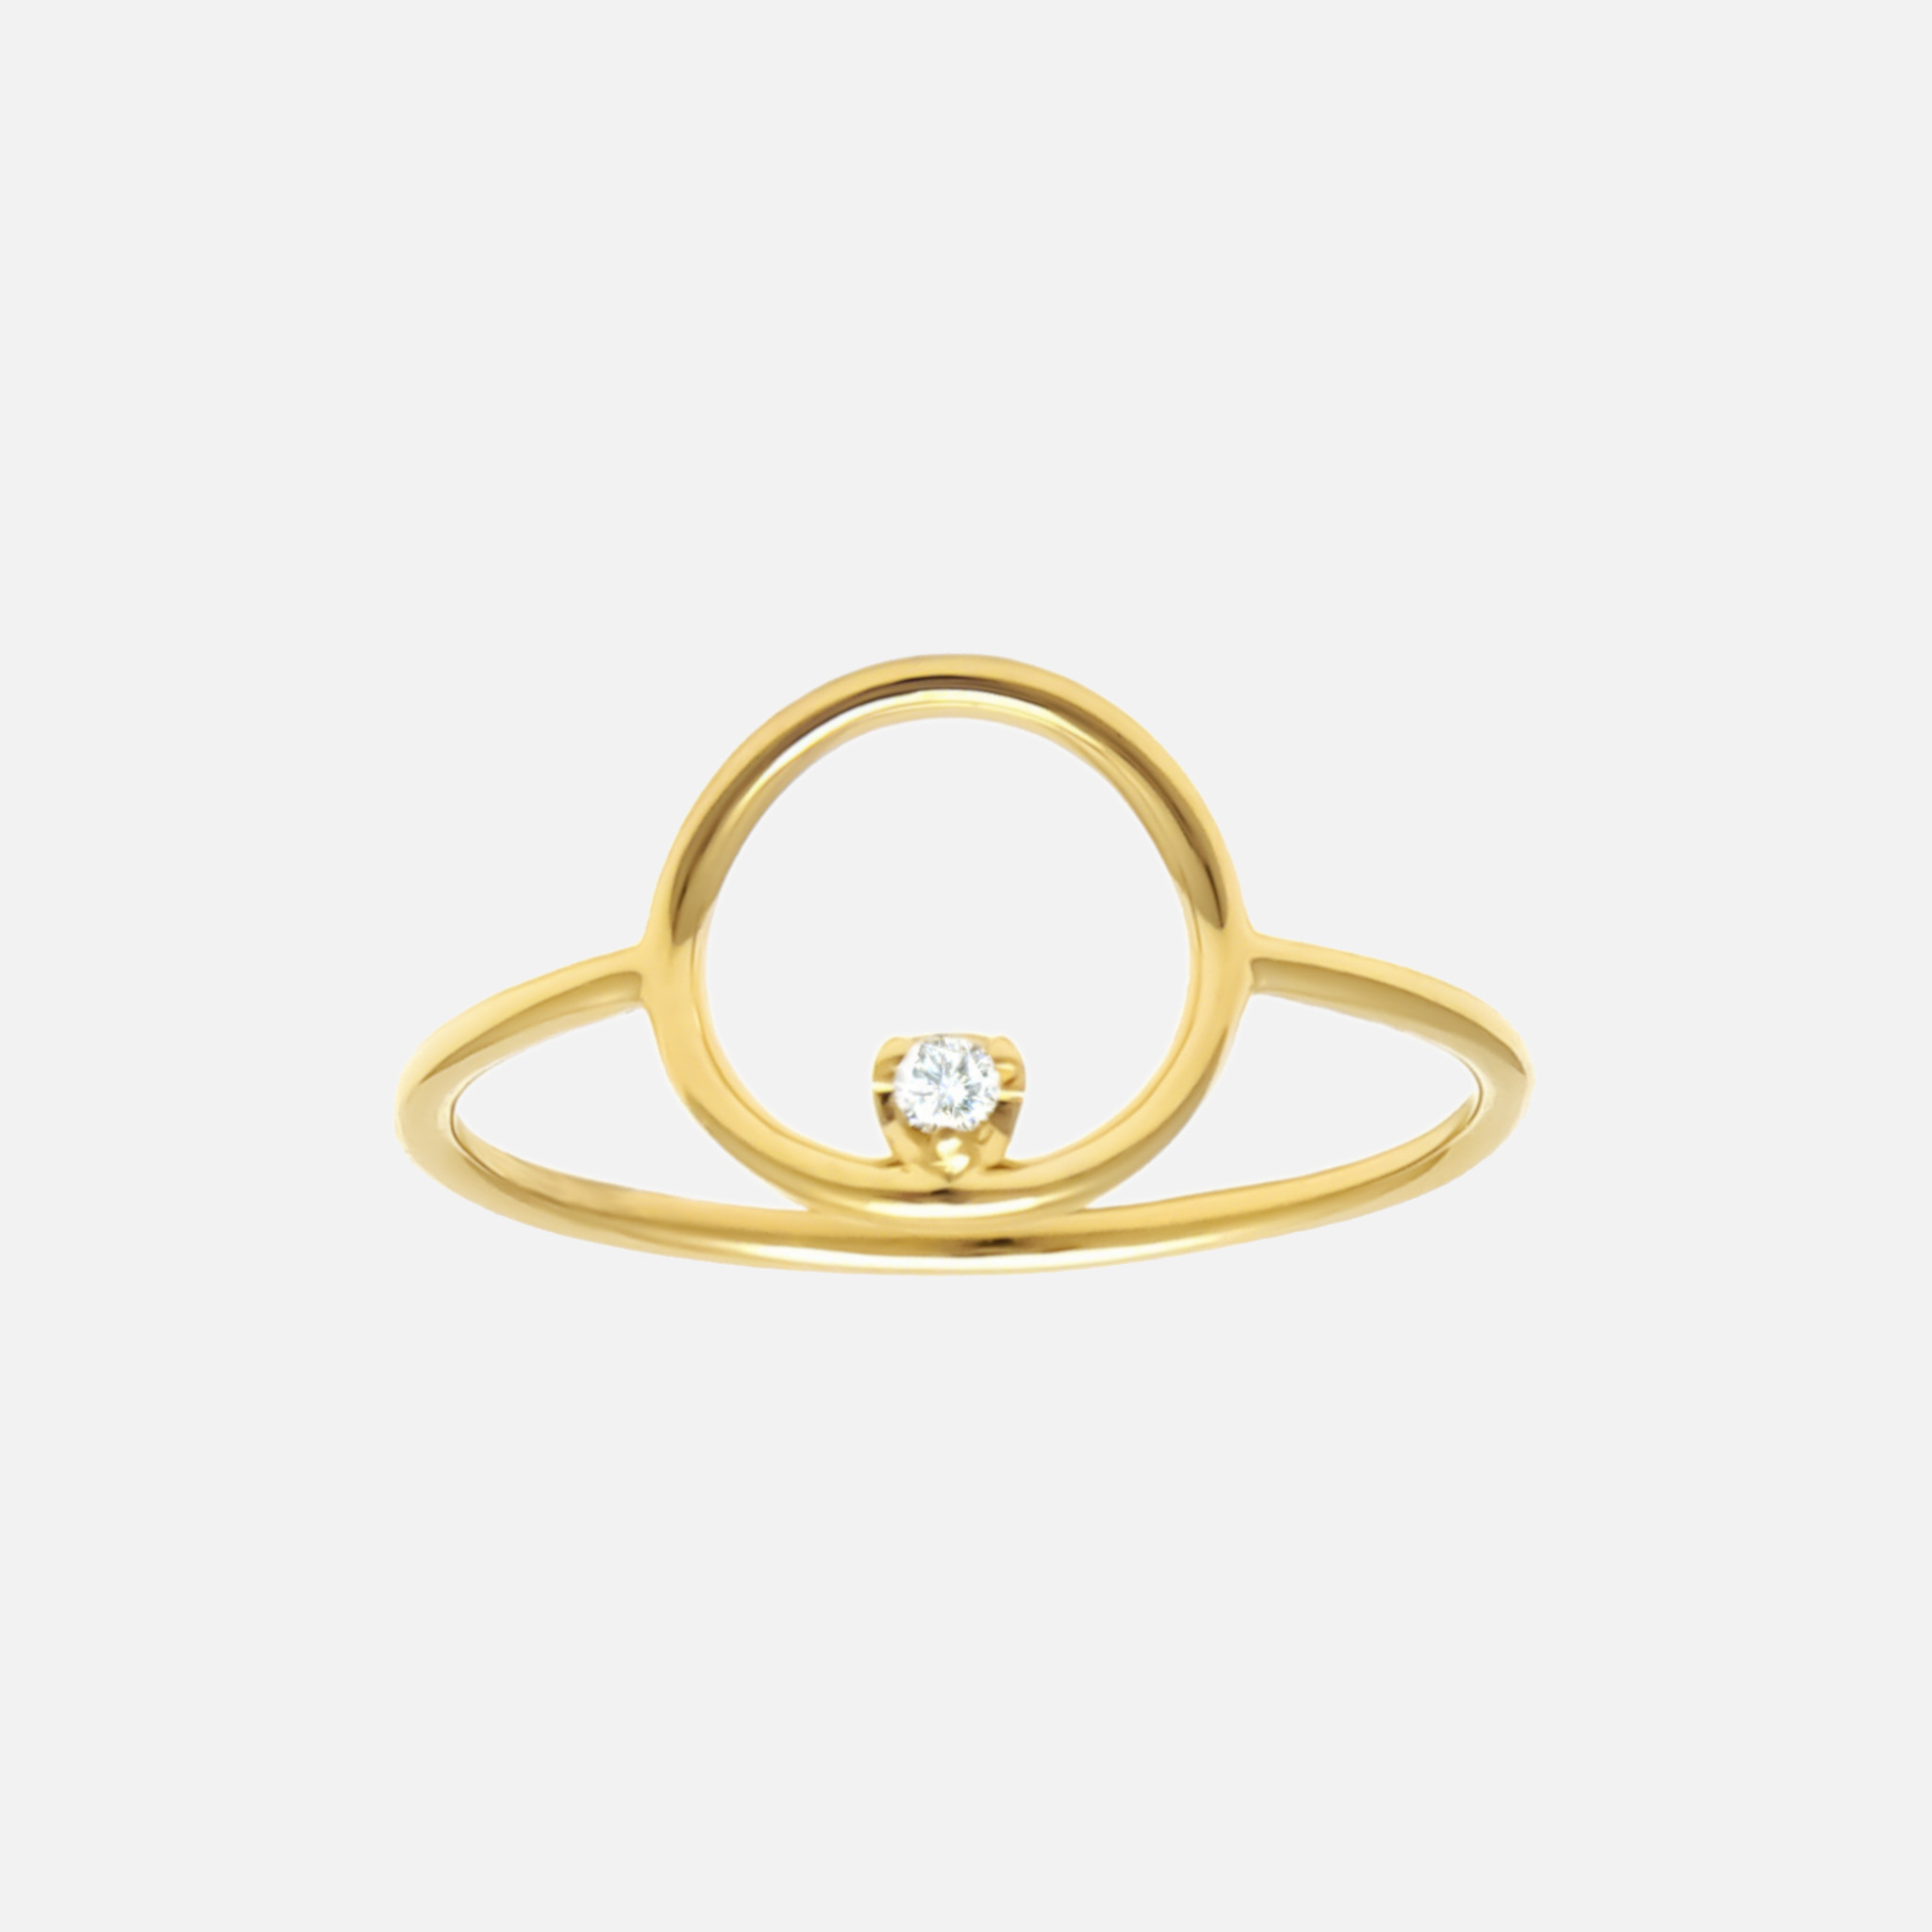 Expertly handcrafted in shiny 14k gold, this thin diamond orbit ring features a single round cut diamond with a .02 CTW, adding a touch of brilliance to its design.